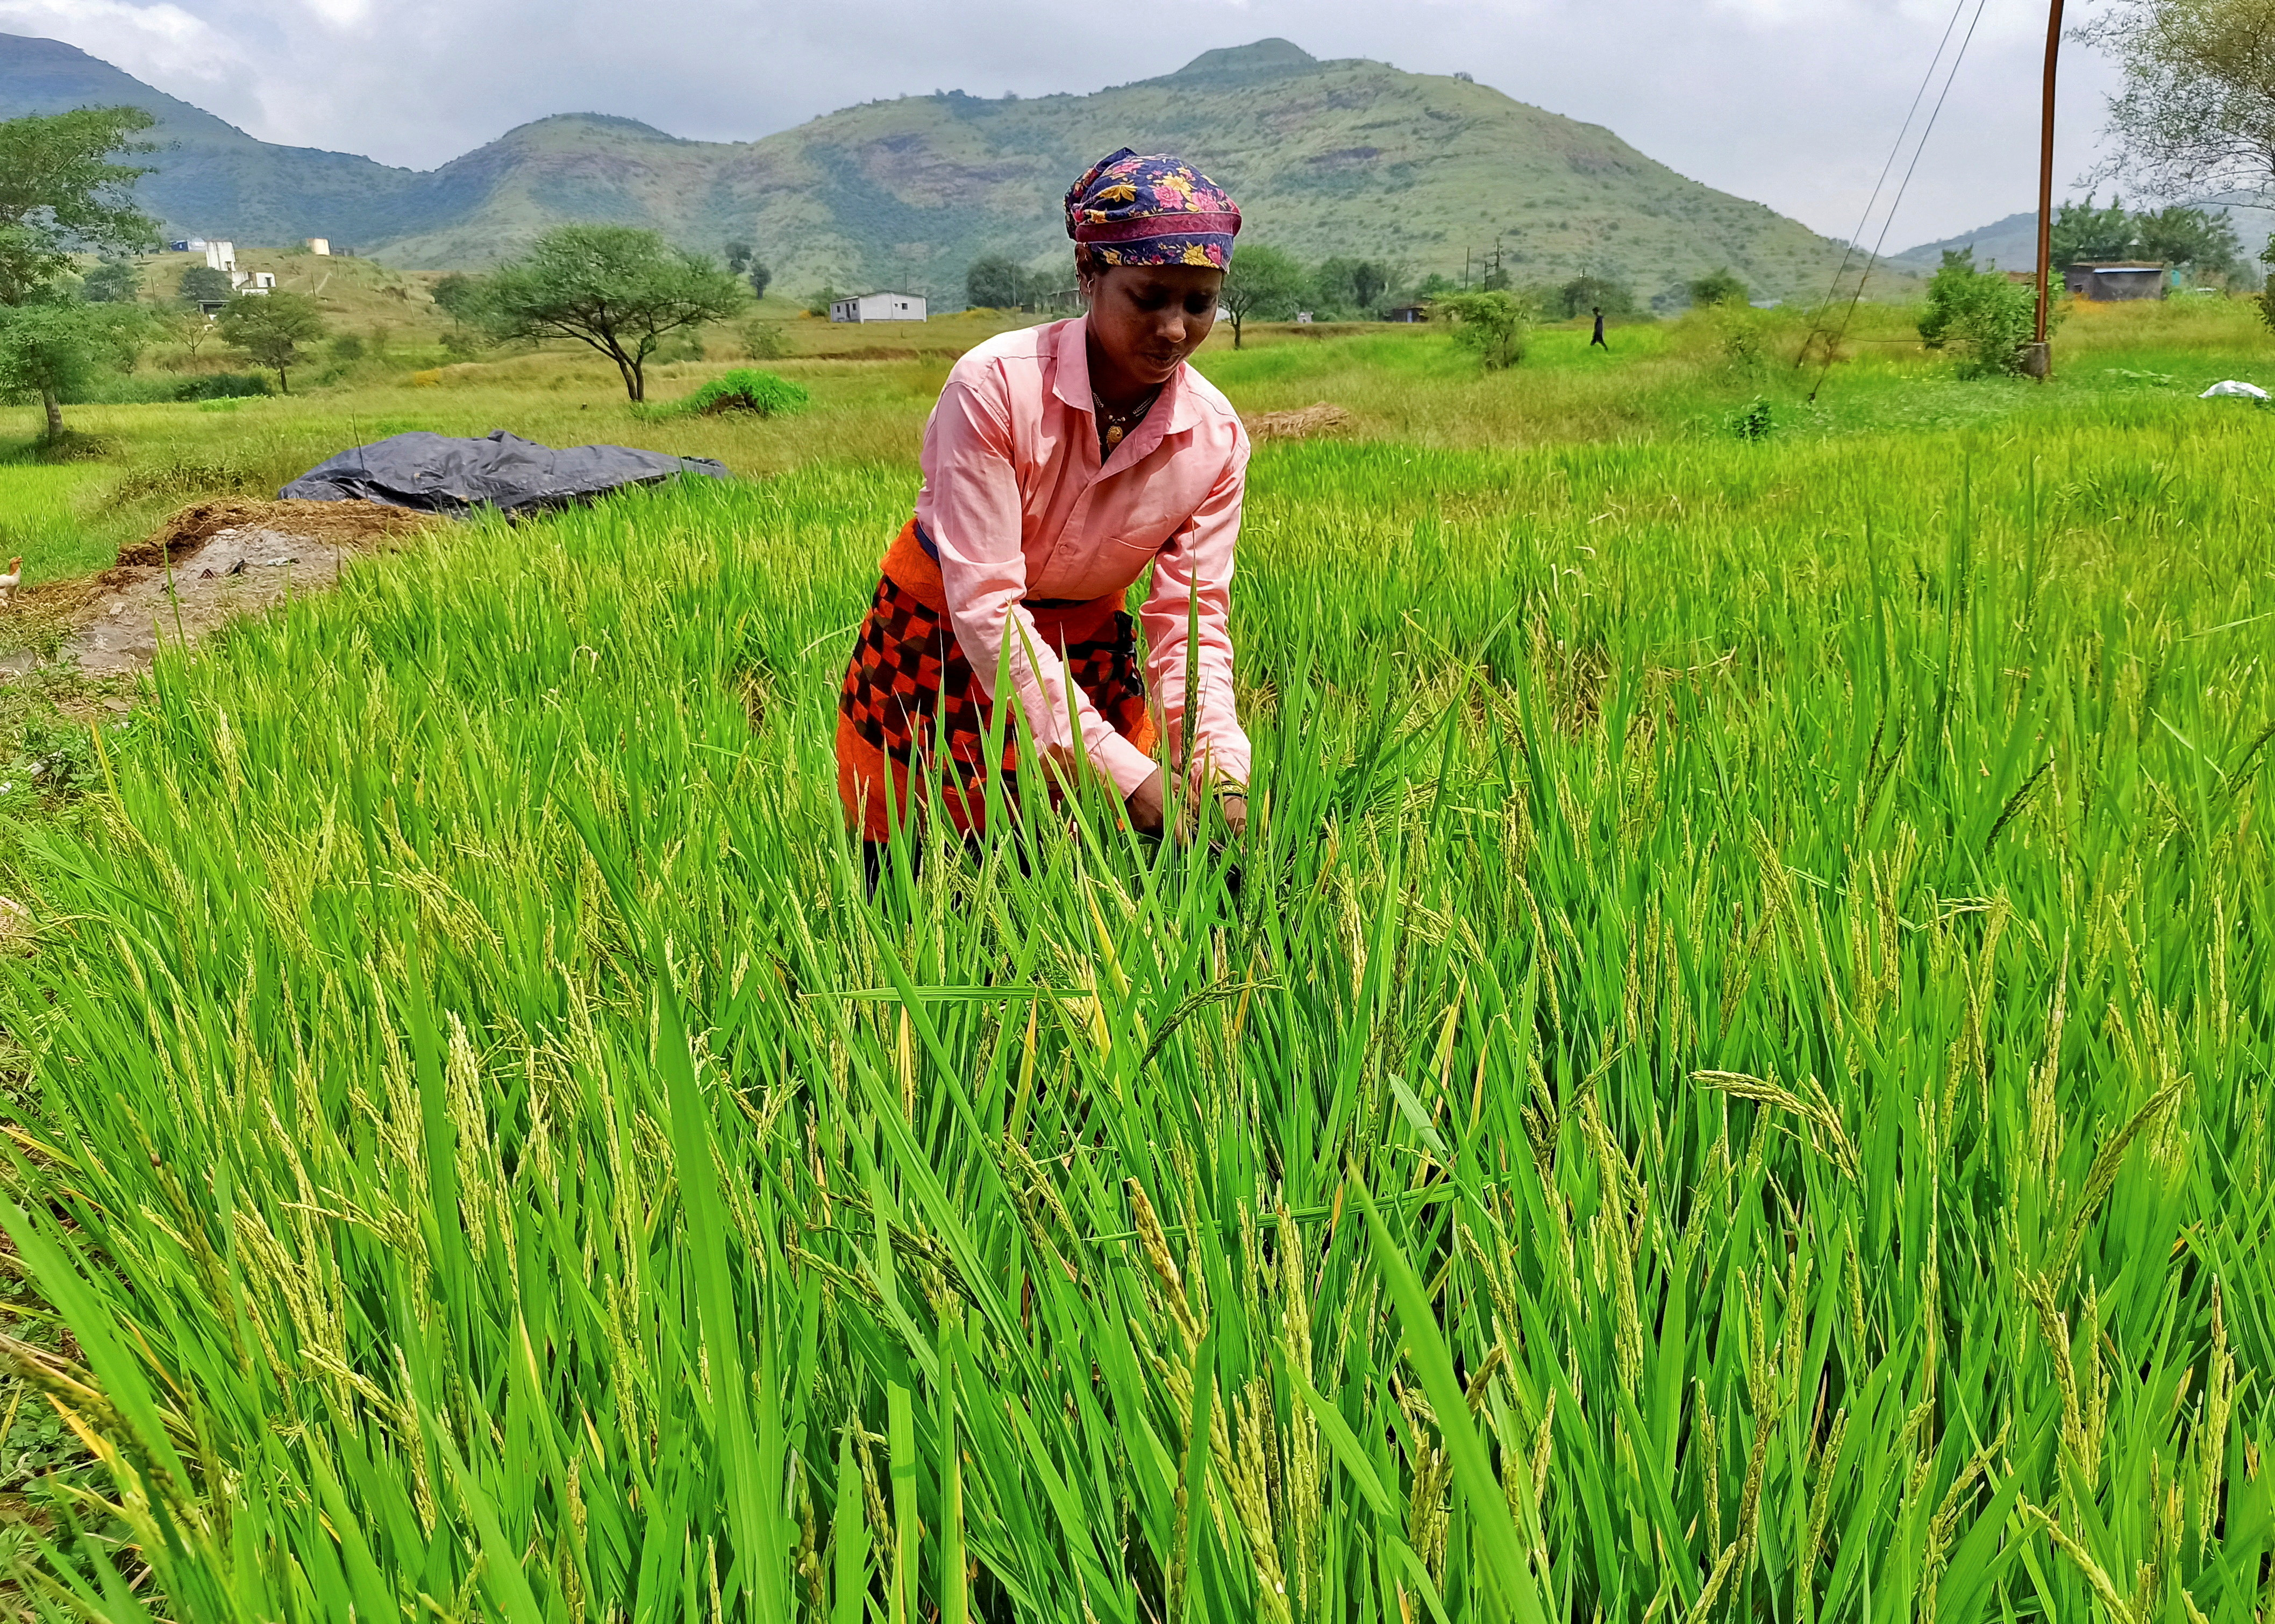 A woman harvests ripened rice in a paddy field at Karunj village